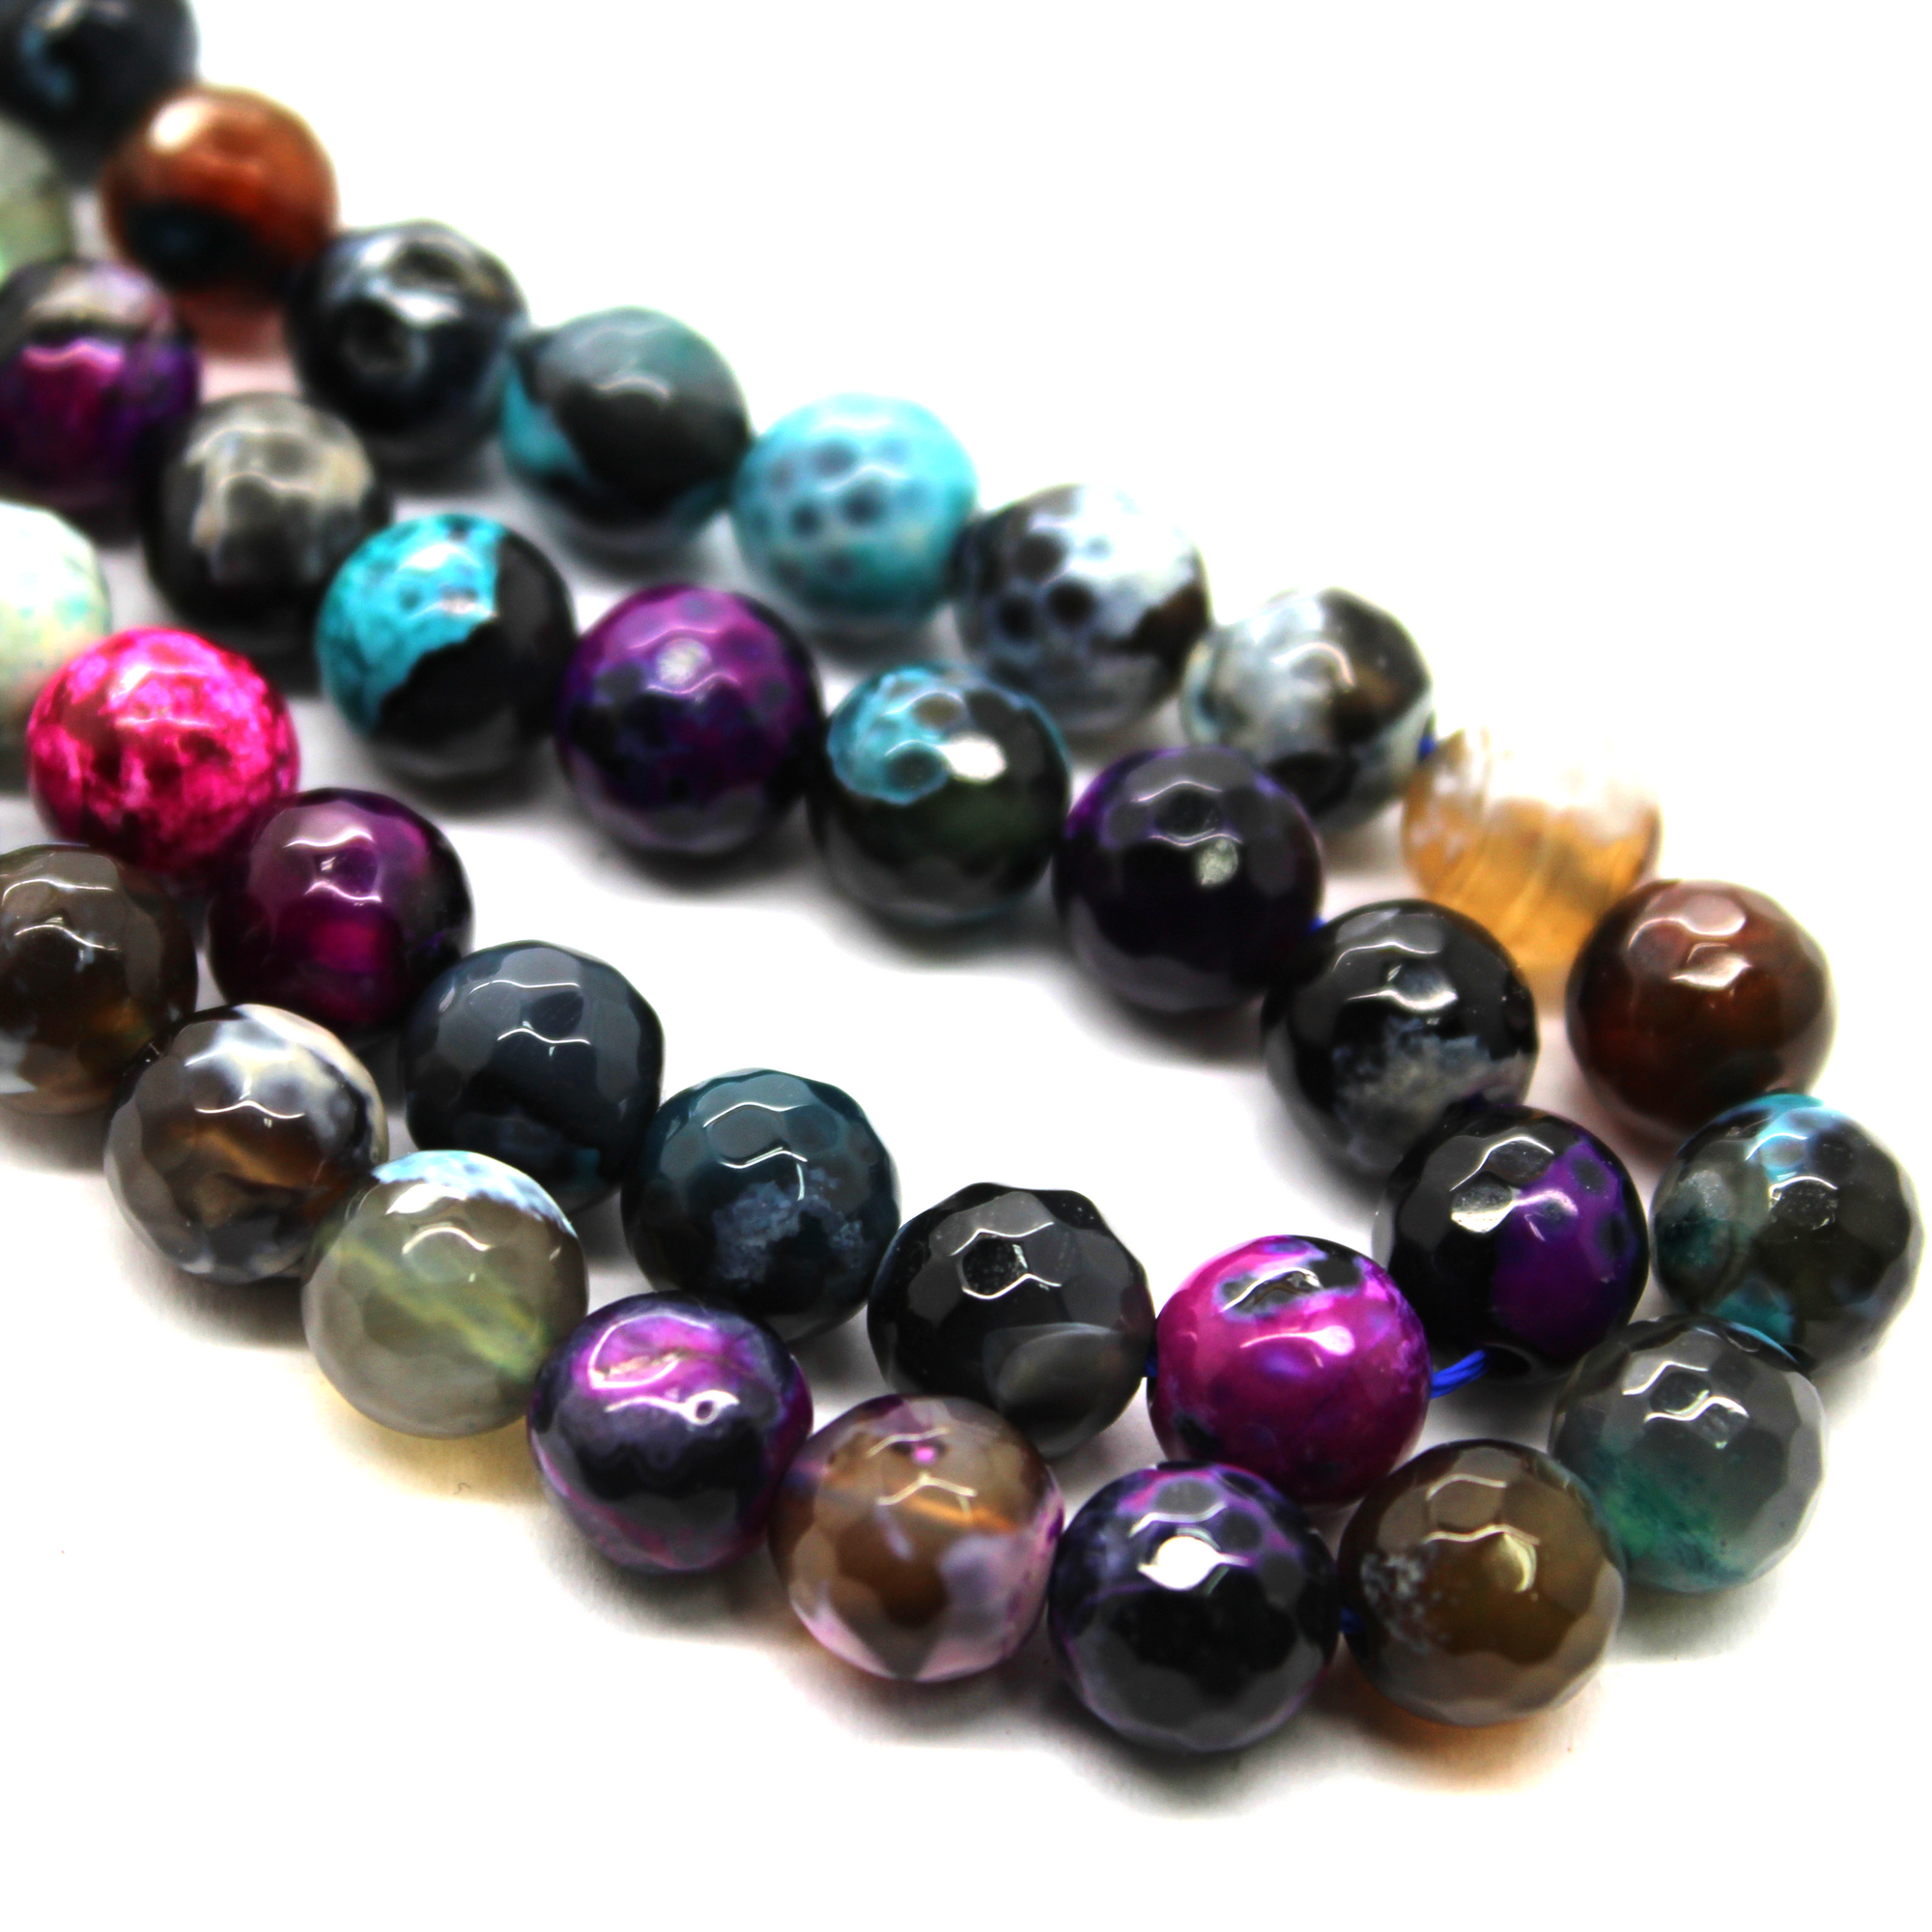 Agate Faceted - Multi color Fire Agate, Semi-Precious Stone, 8mm, 45 pcs per strand - Butterfly Beads